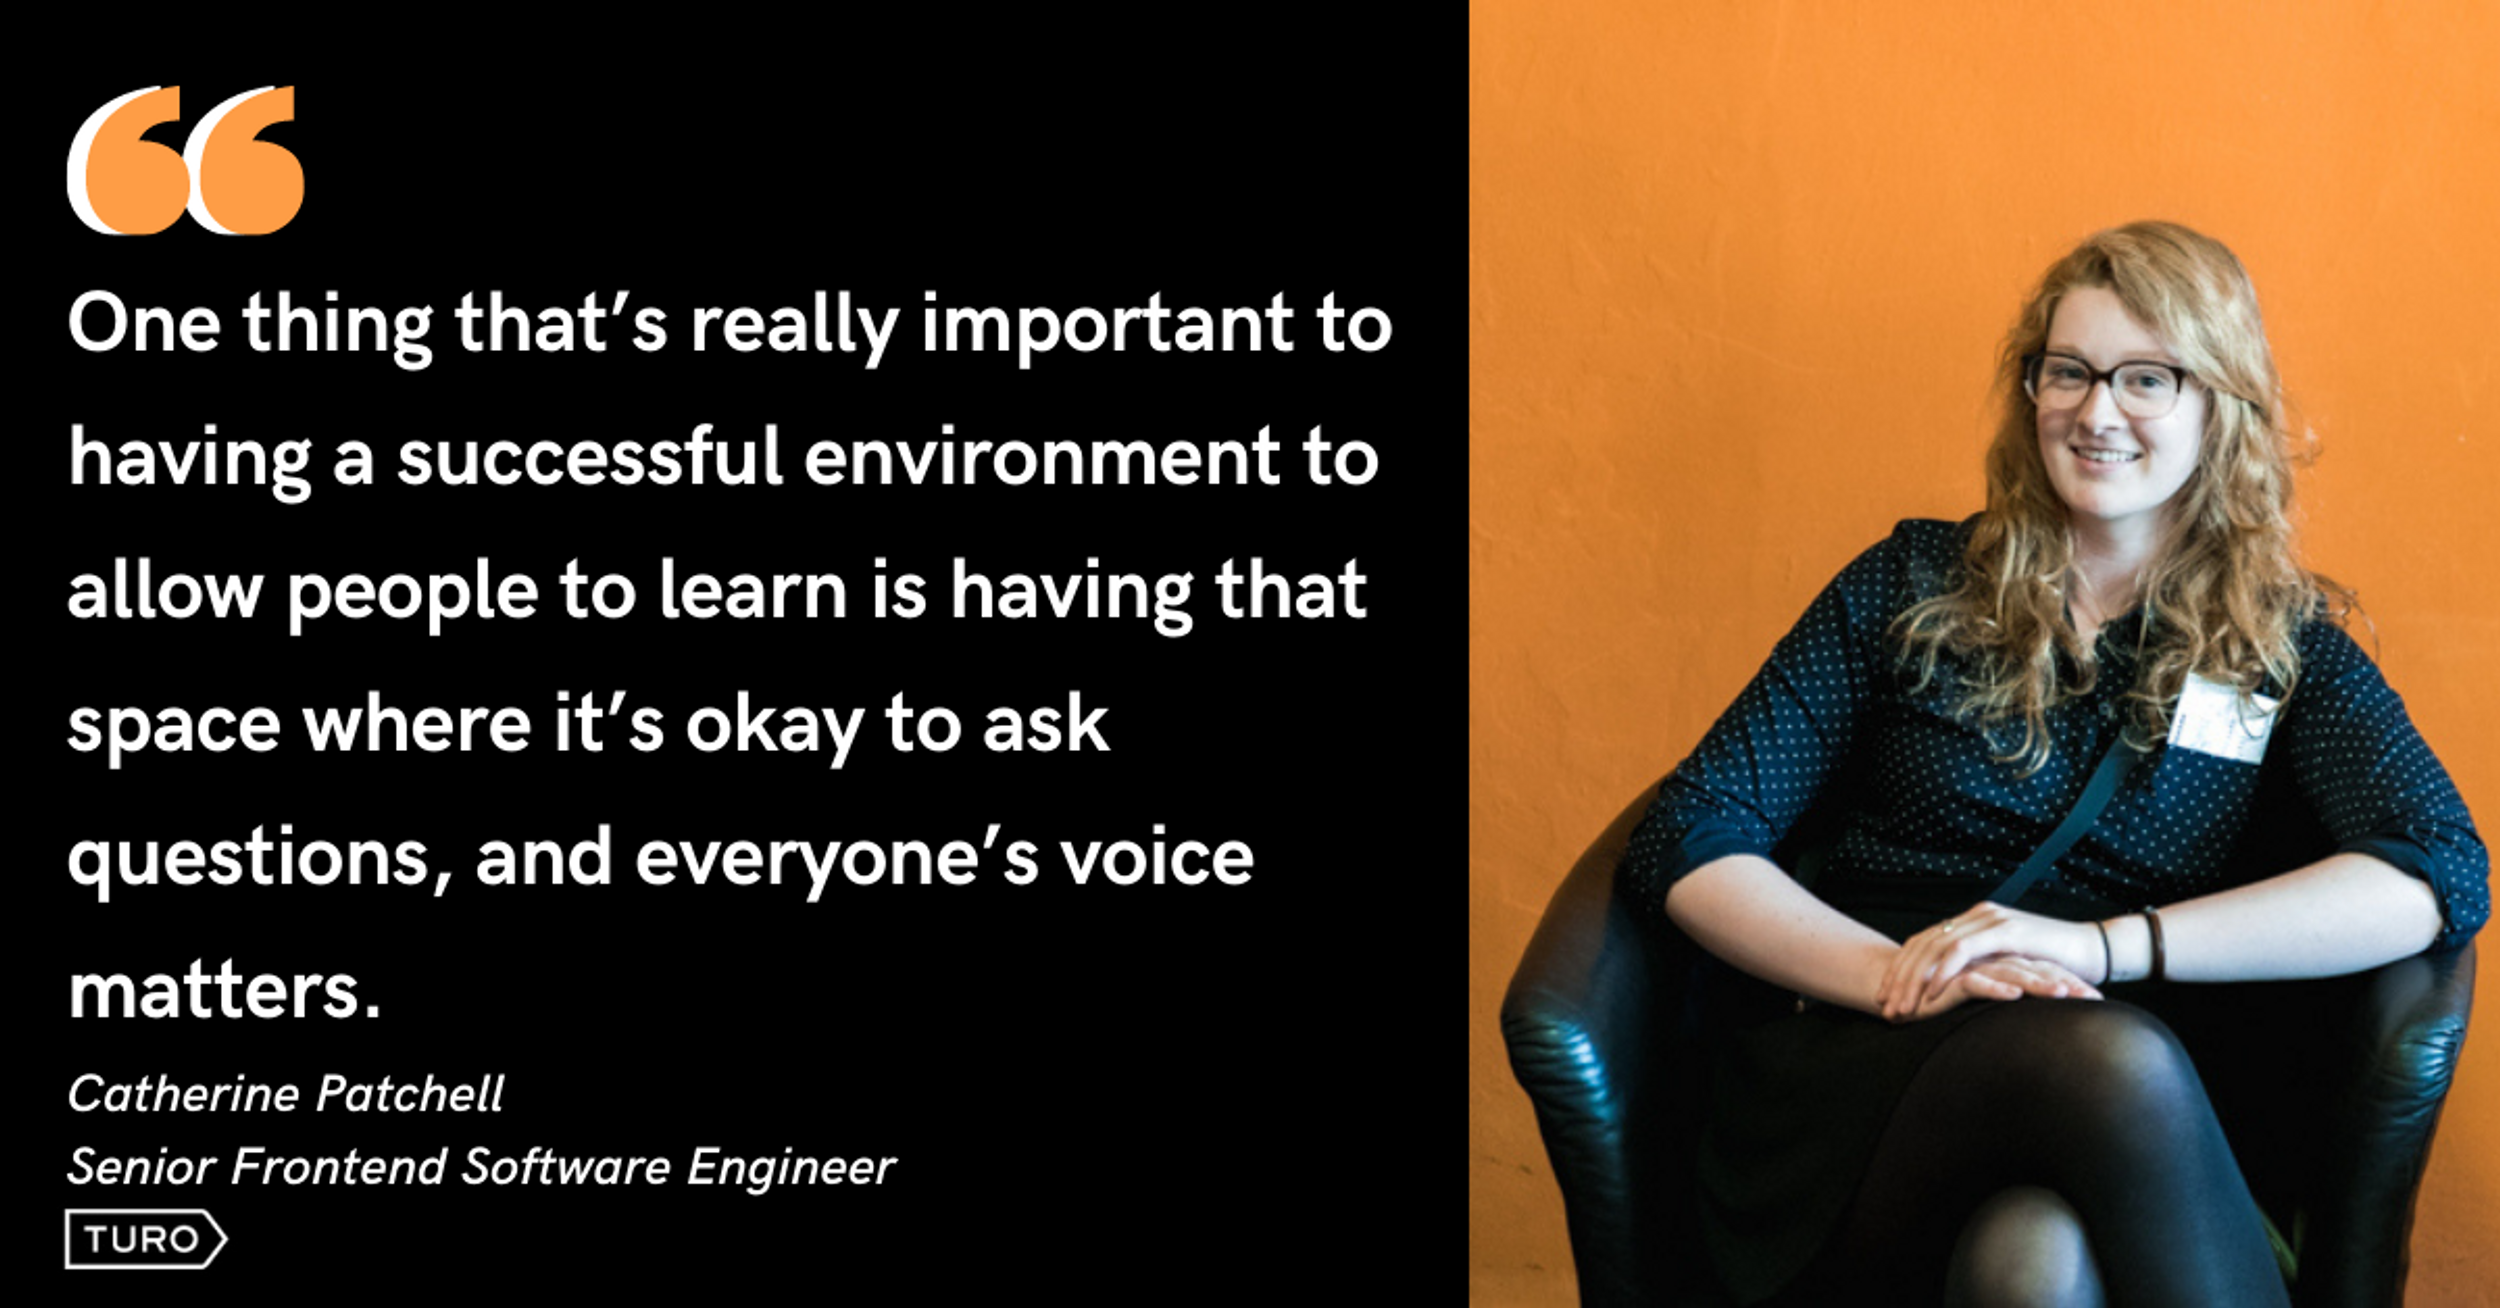 Blog post header with quote from Catherine Patchell, Senior Frontend Software Engineer at Turo